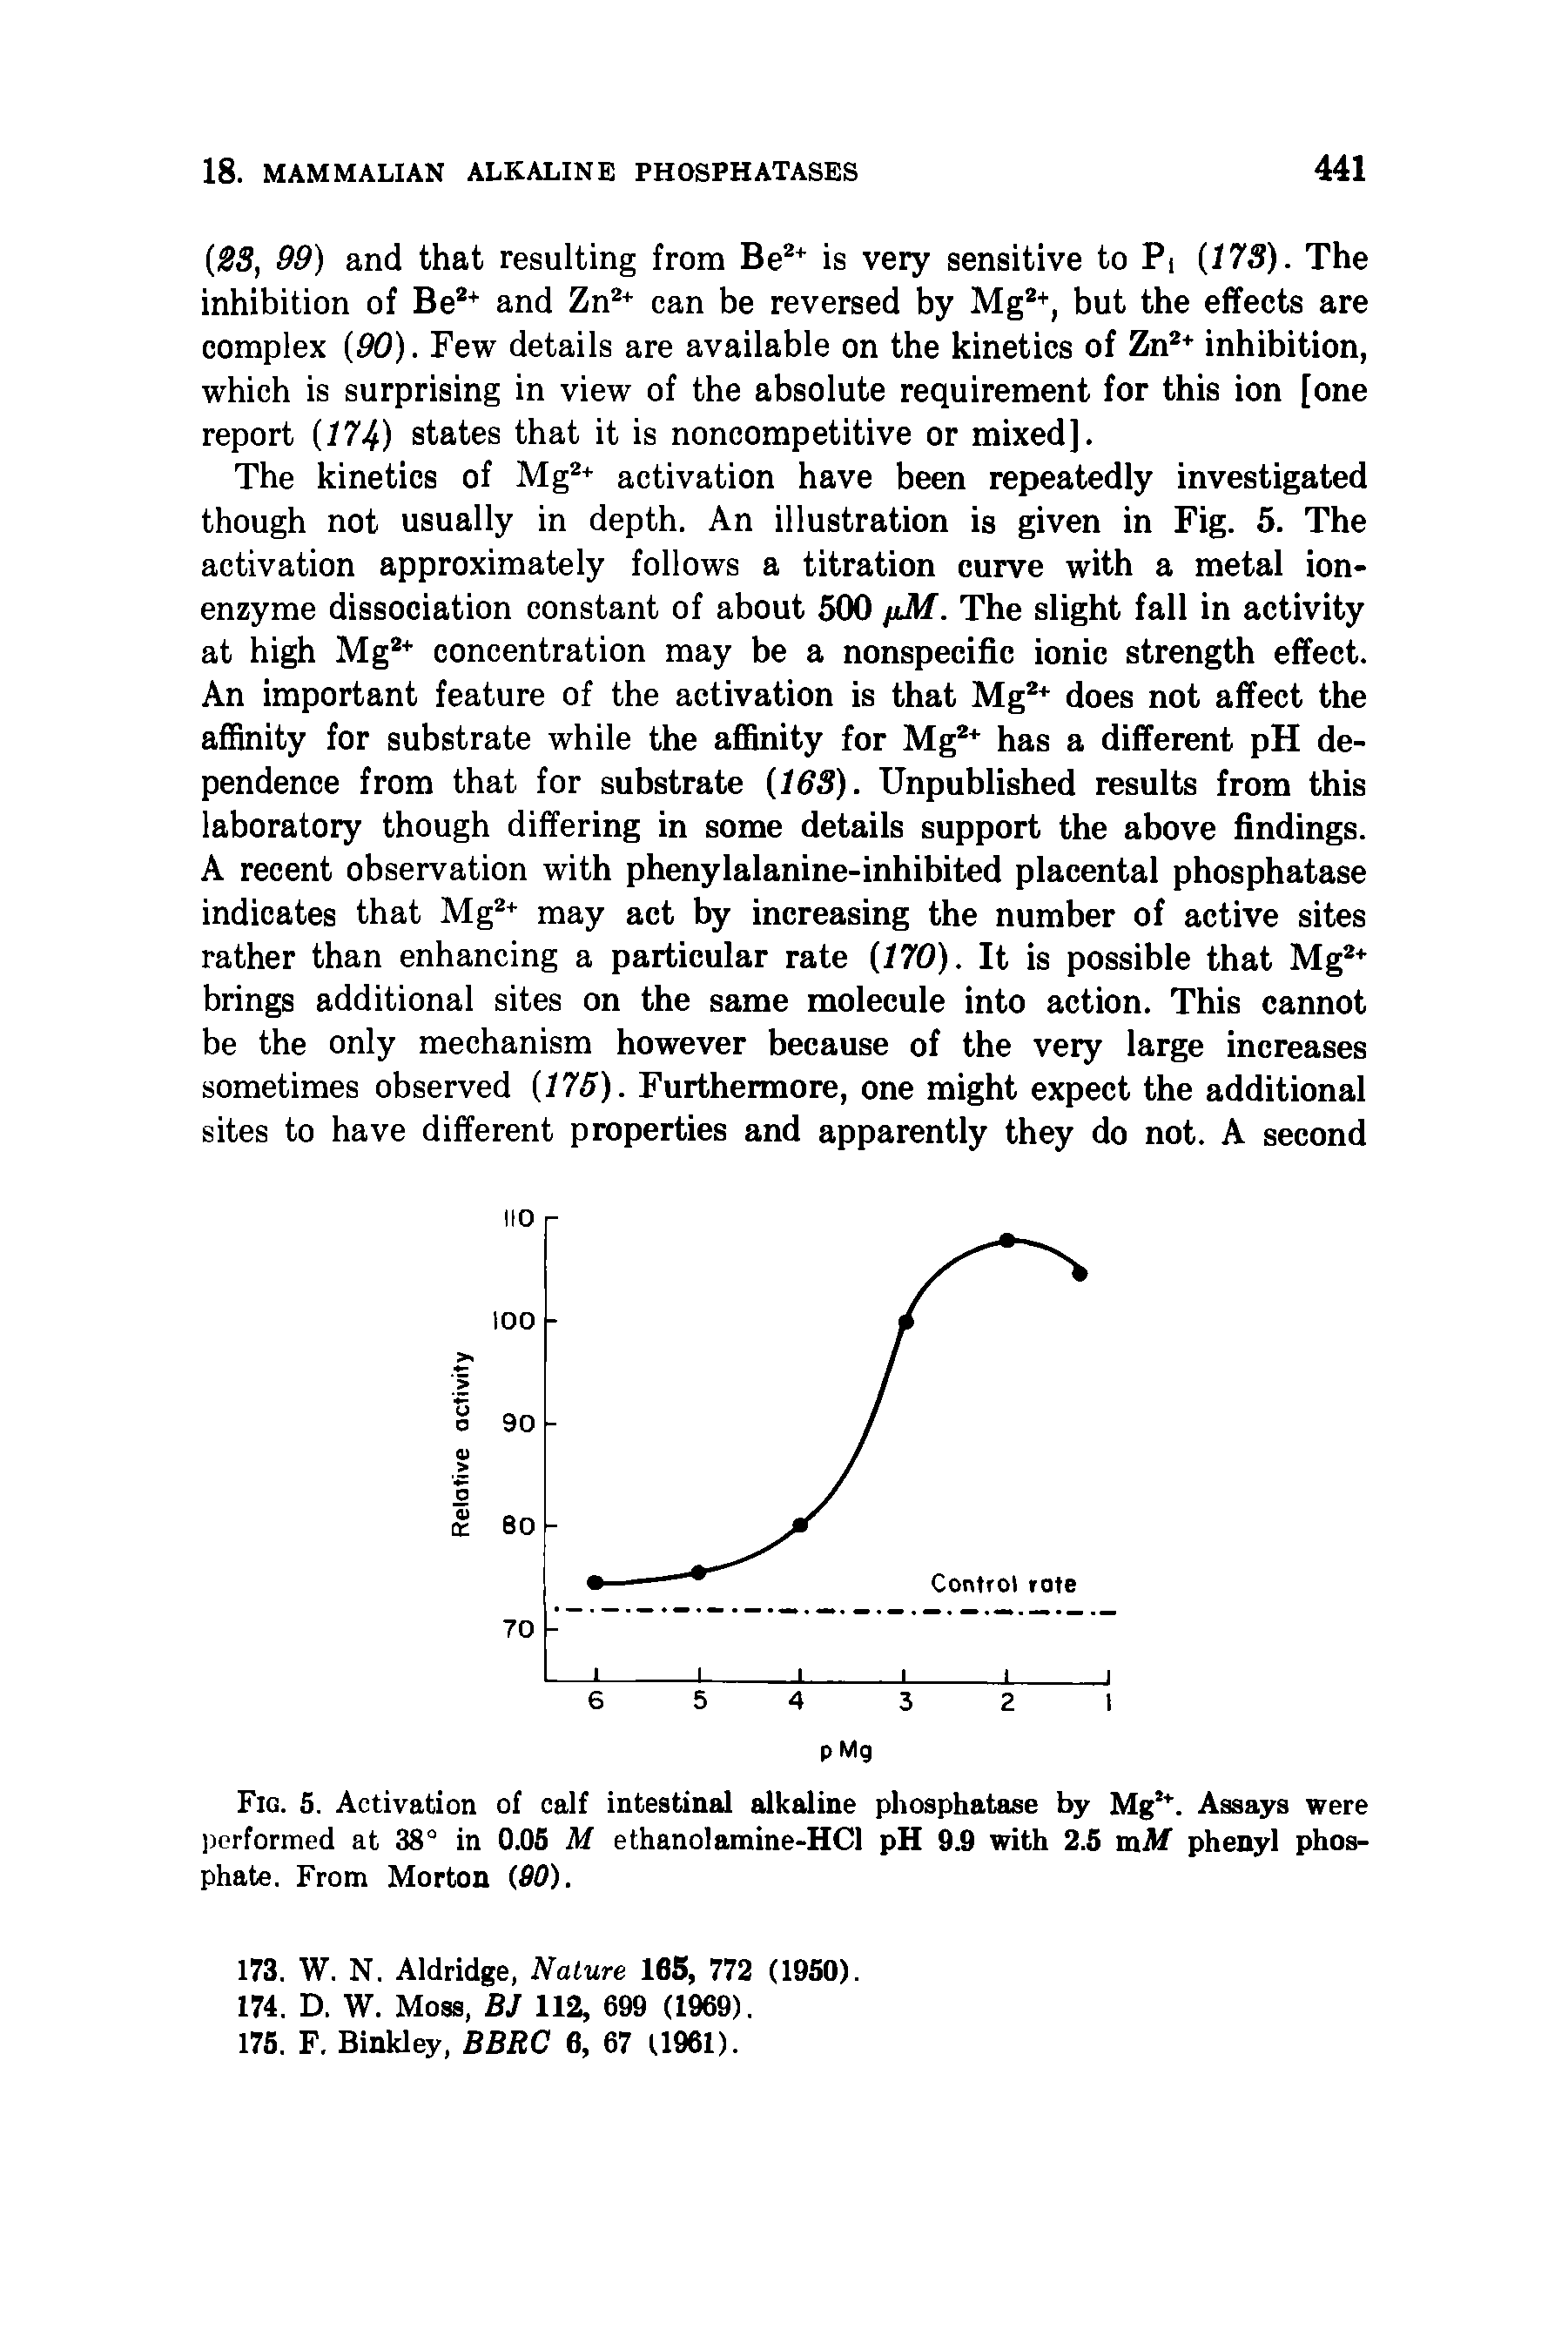 Fig. 5. Activation of calf intestinal alkaline phosphatase by Mg. Assays were performed at 38° in 0.05 M ethanolamine-HCl pH 9.9 with 2.5 mM phenyl phosphate. From Morton (90).